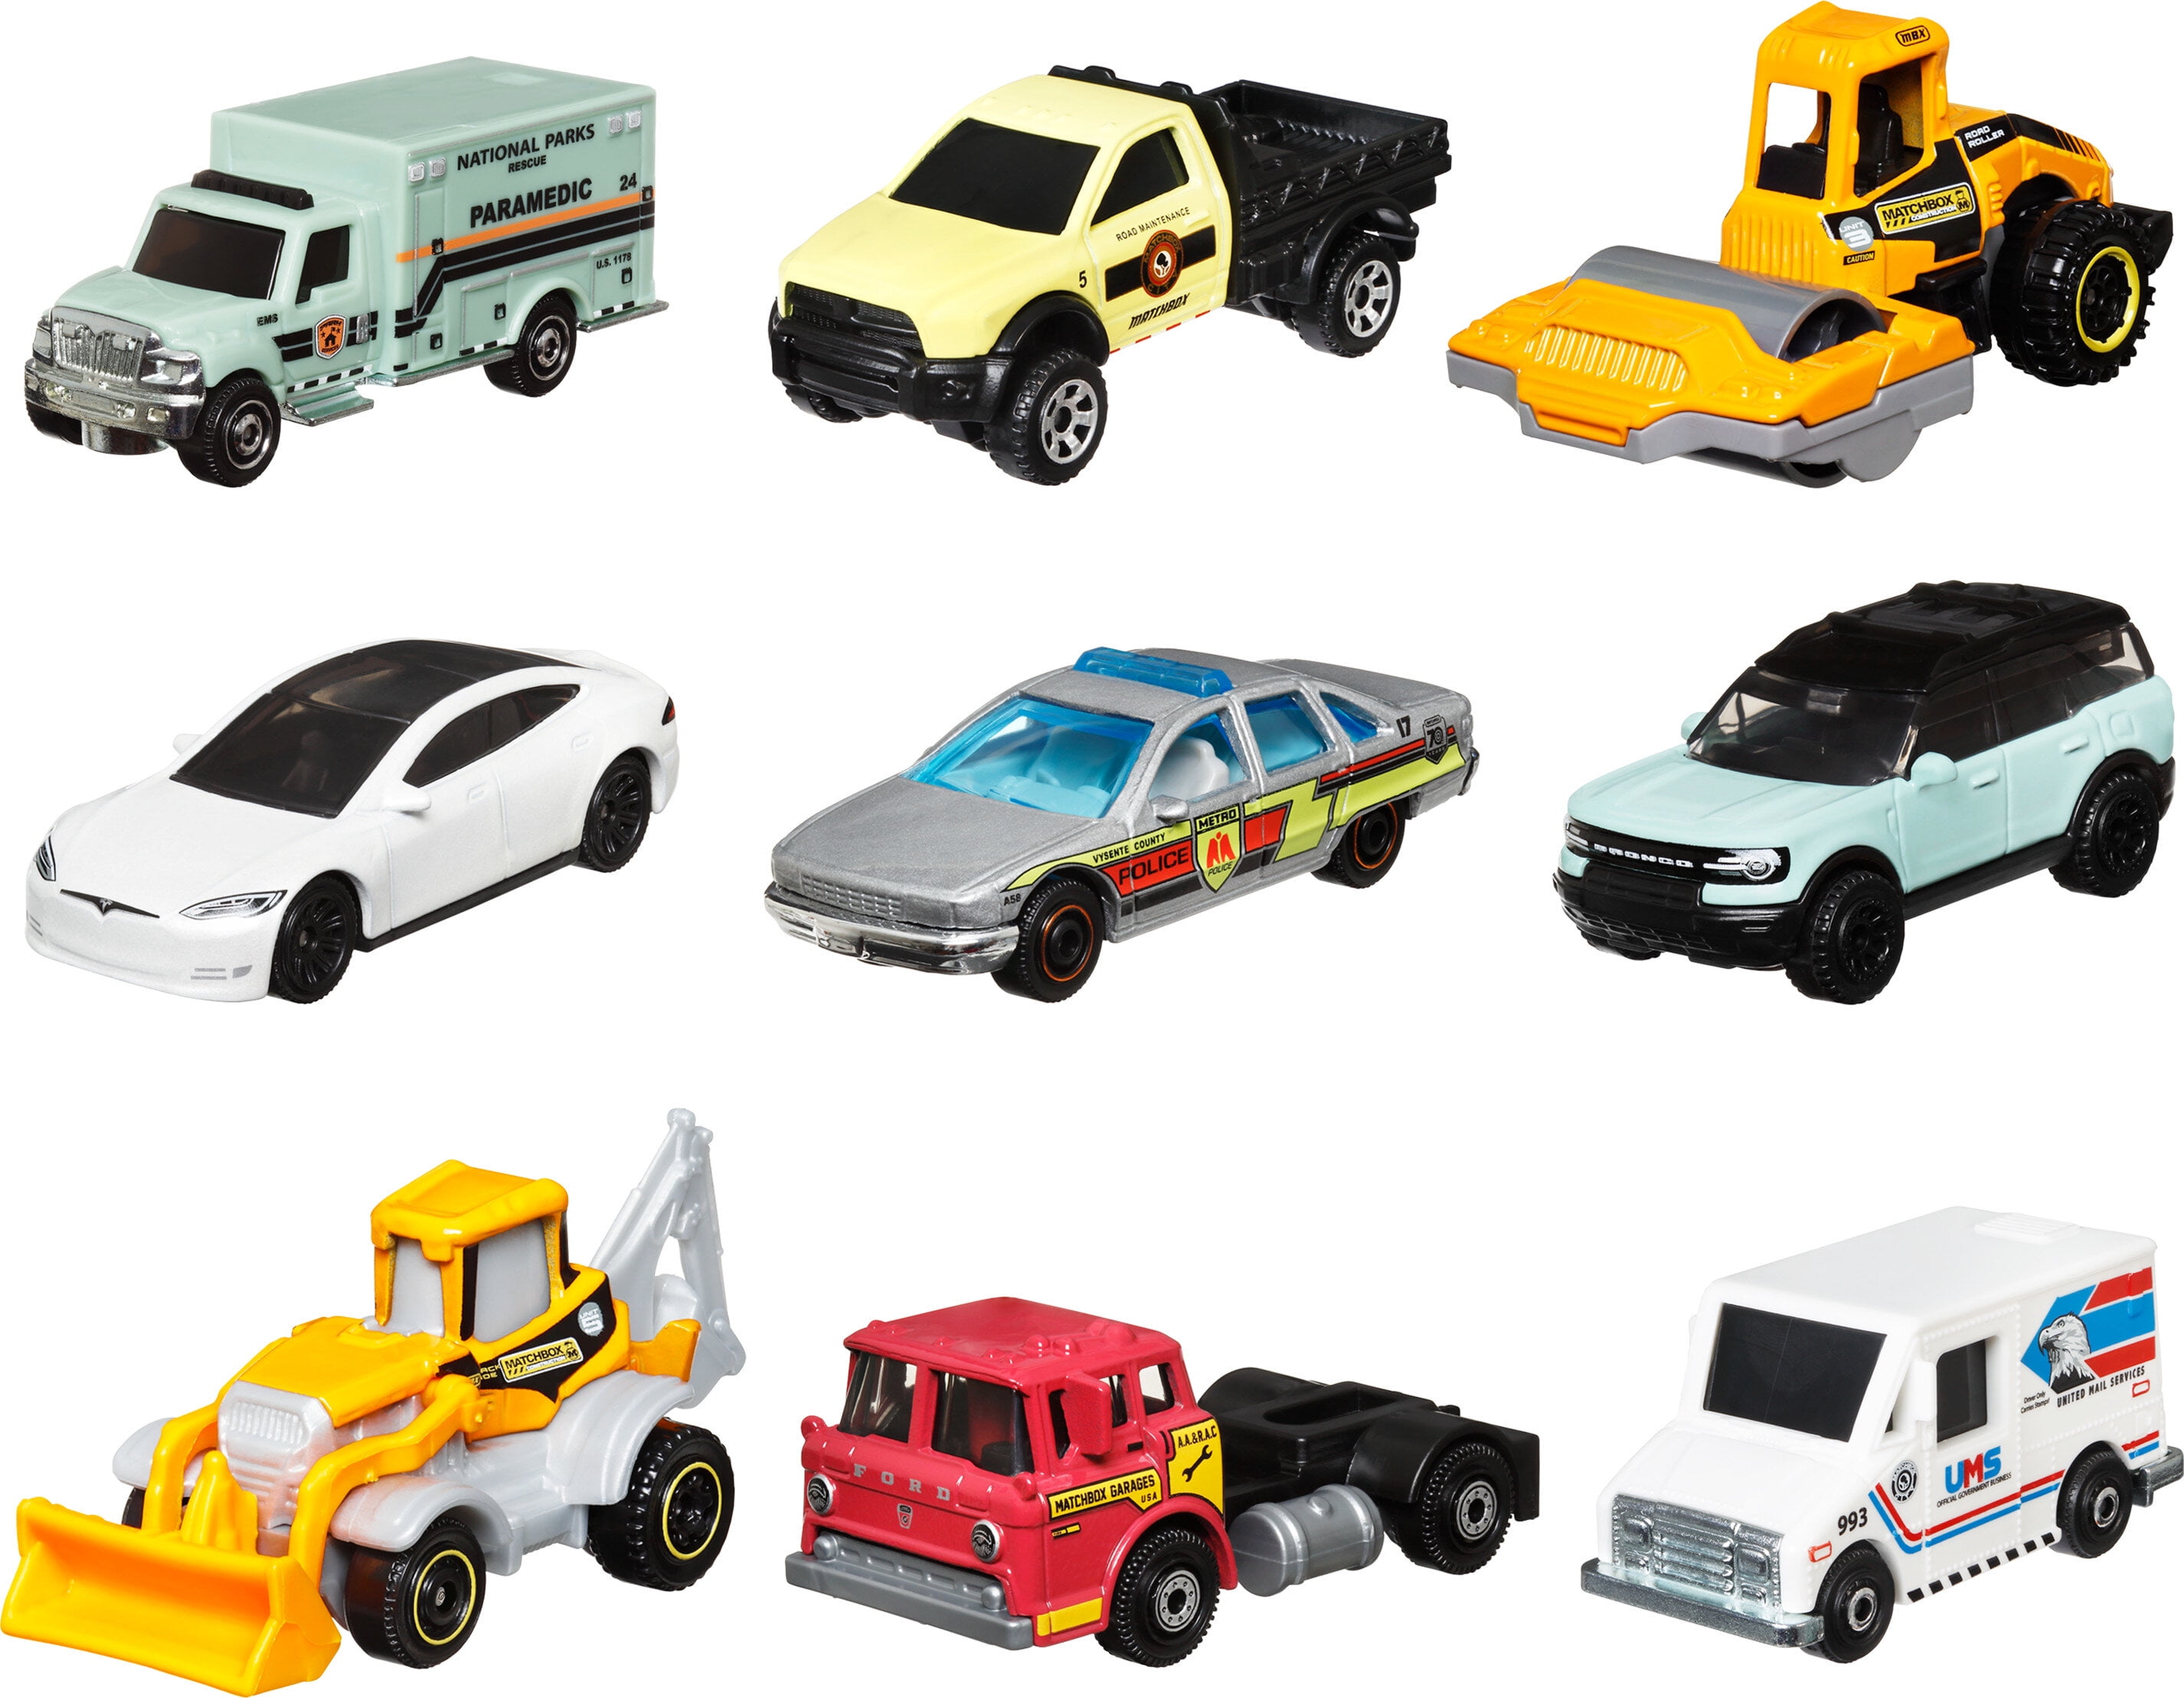 Matchbox Gift Set of 9 Themed Cars or Trucks in 1:64 Scale (Styles May Vary)